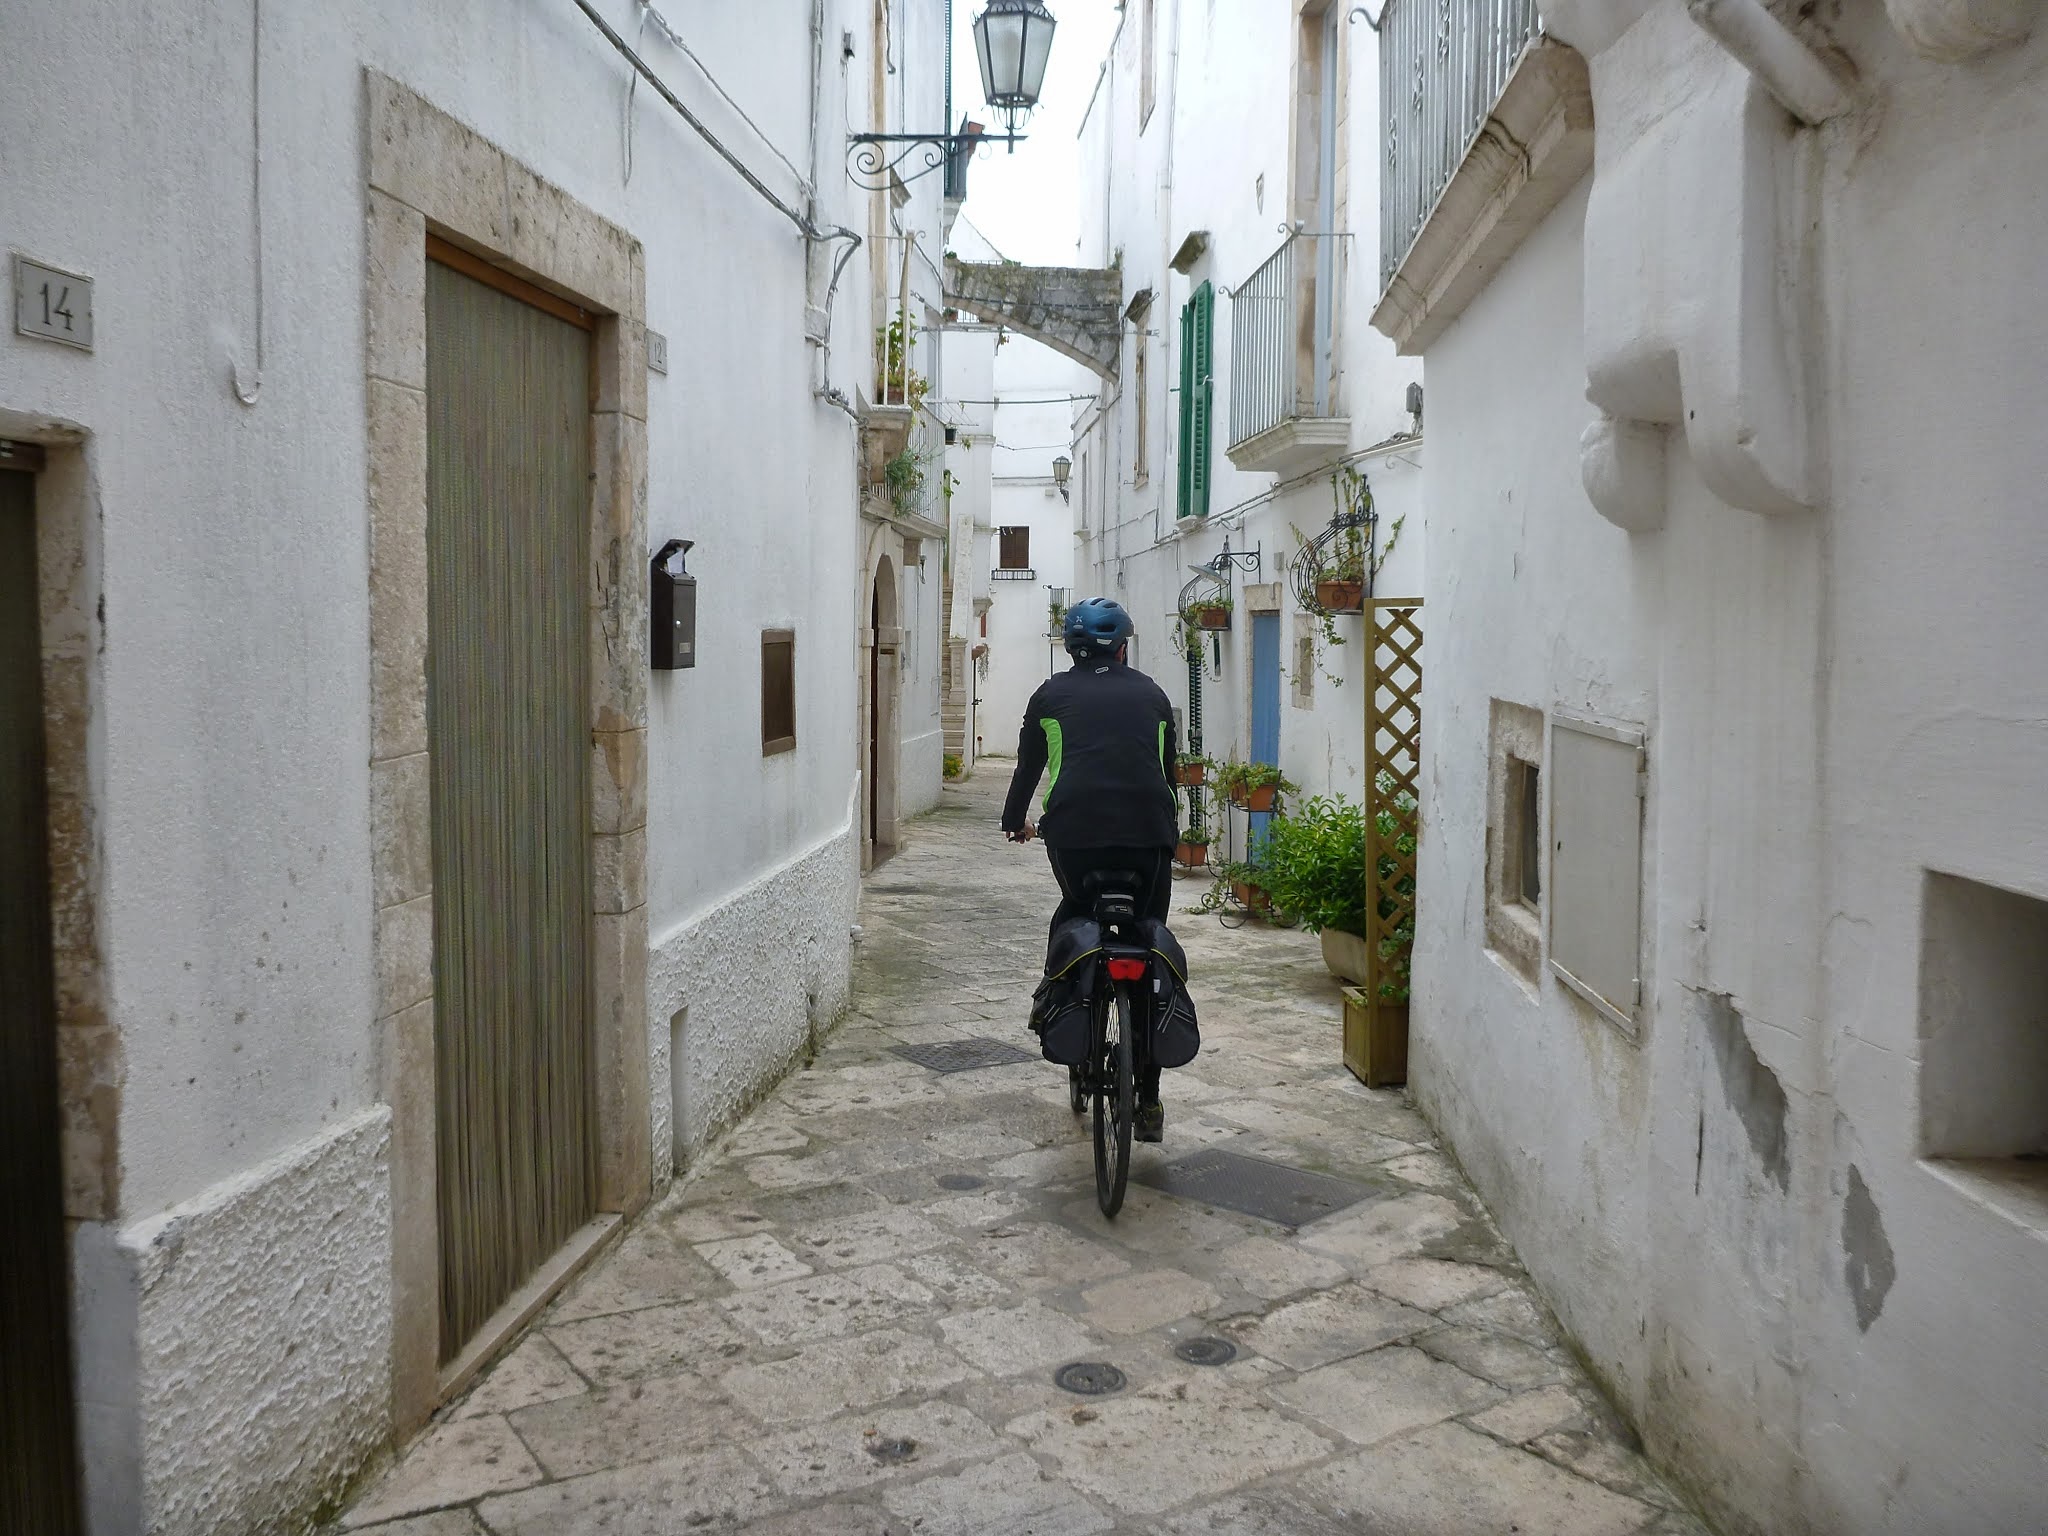 Riding through a typical village in Apulia